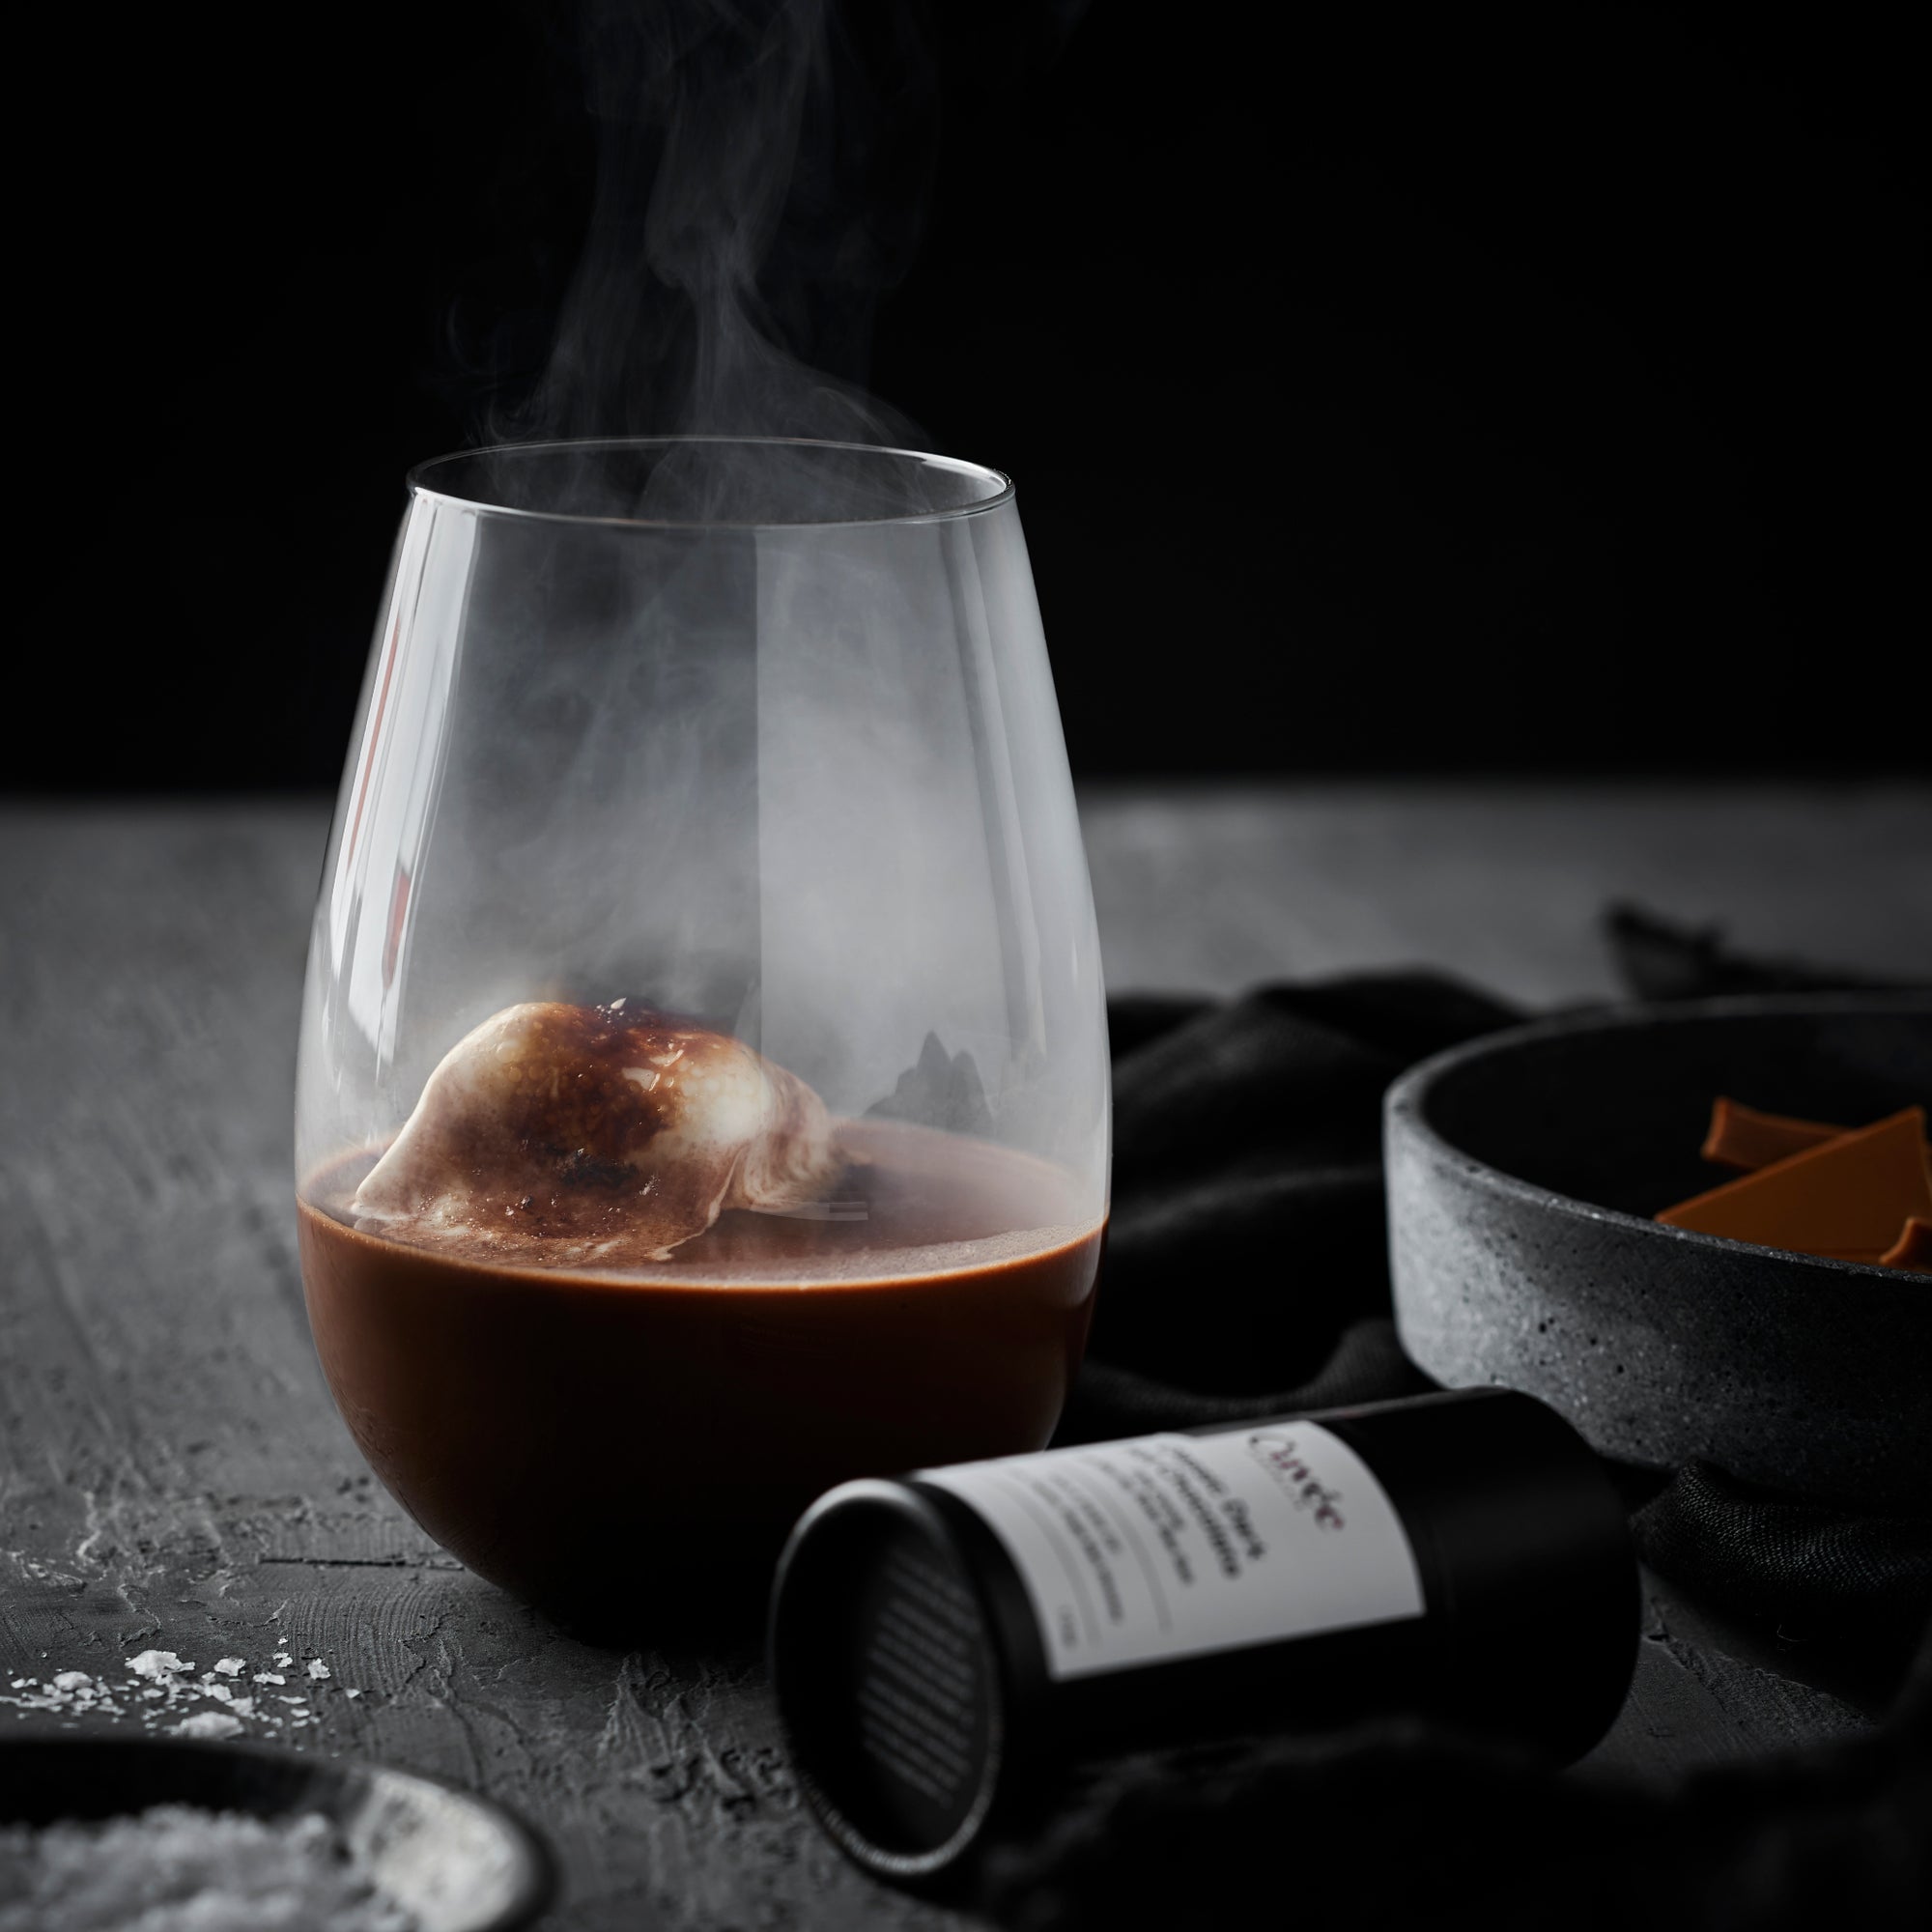 Cuvée 75% Chili Hot Chocolate - 150g (approx. 5 cups)